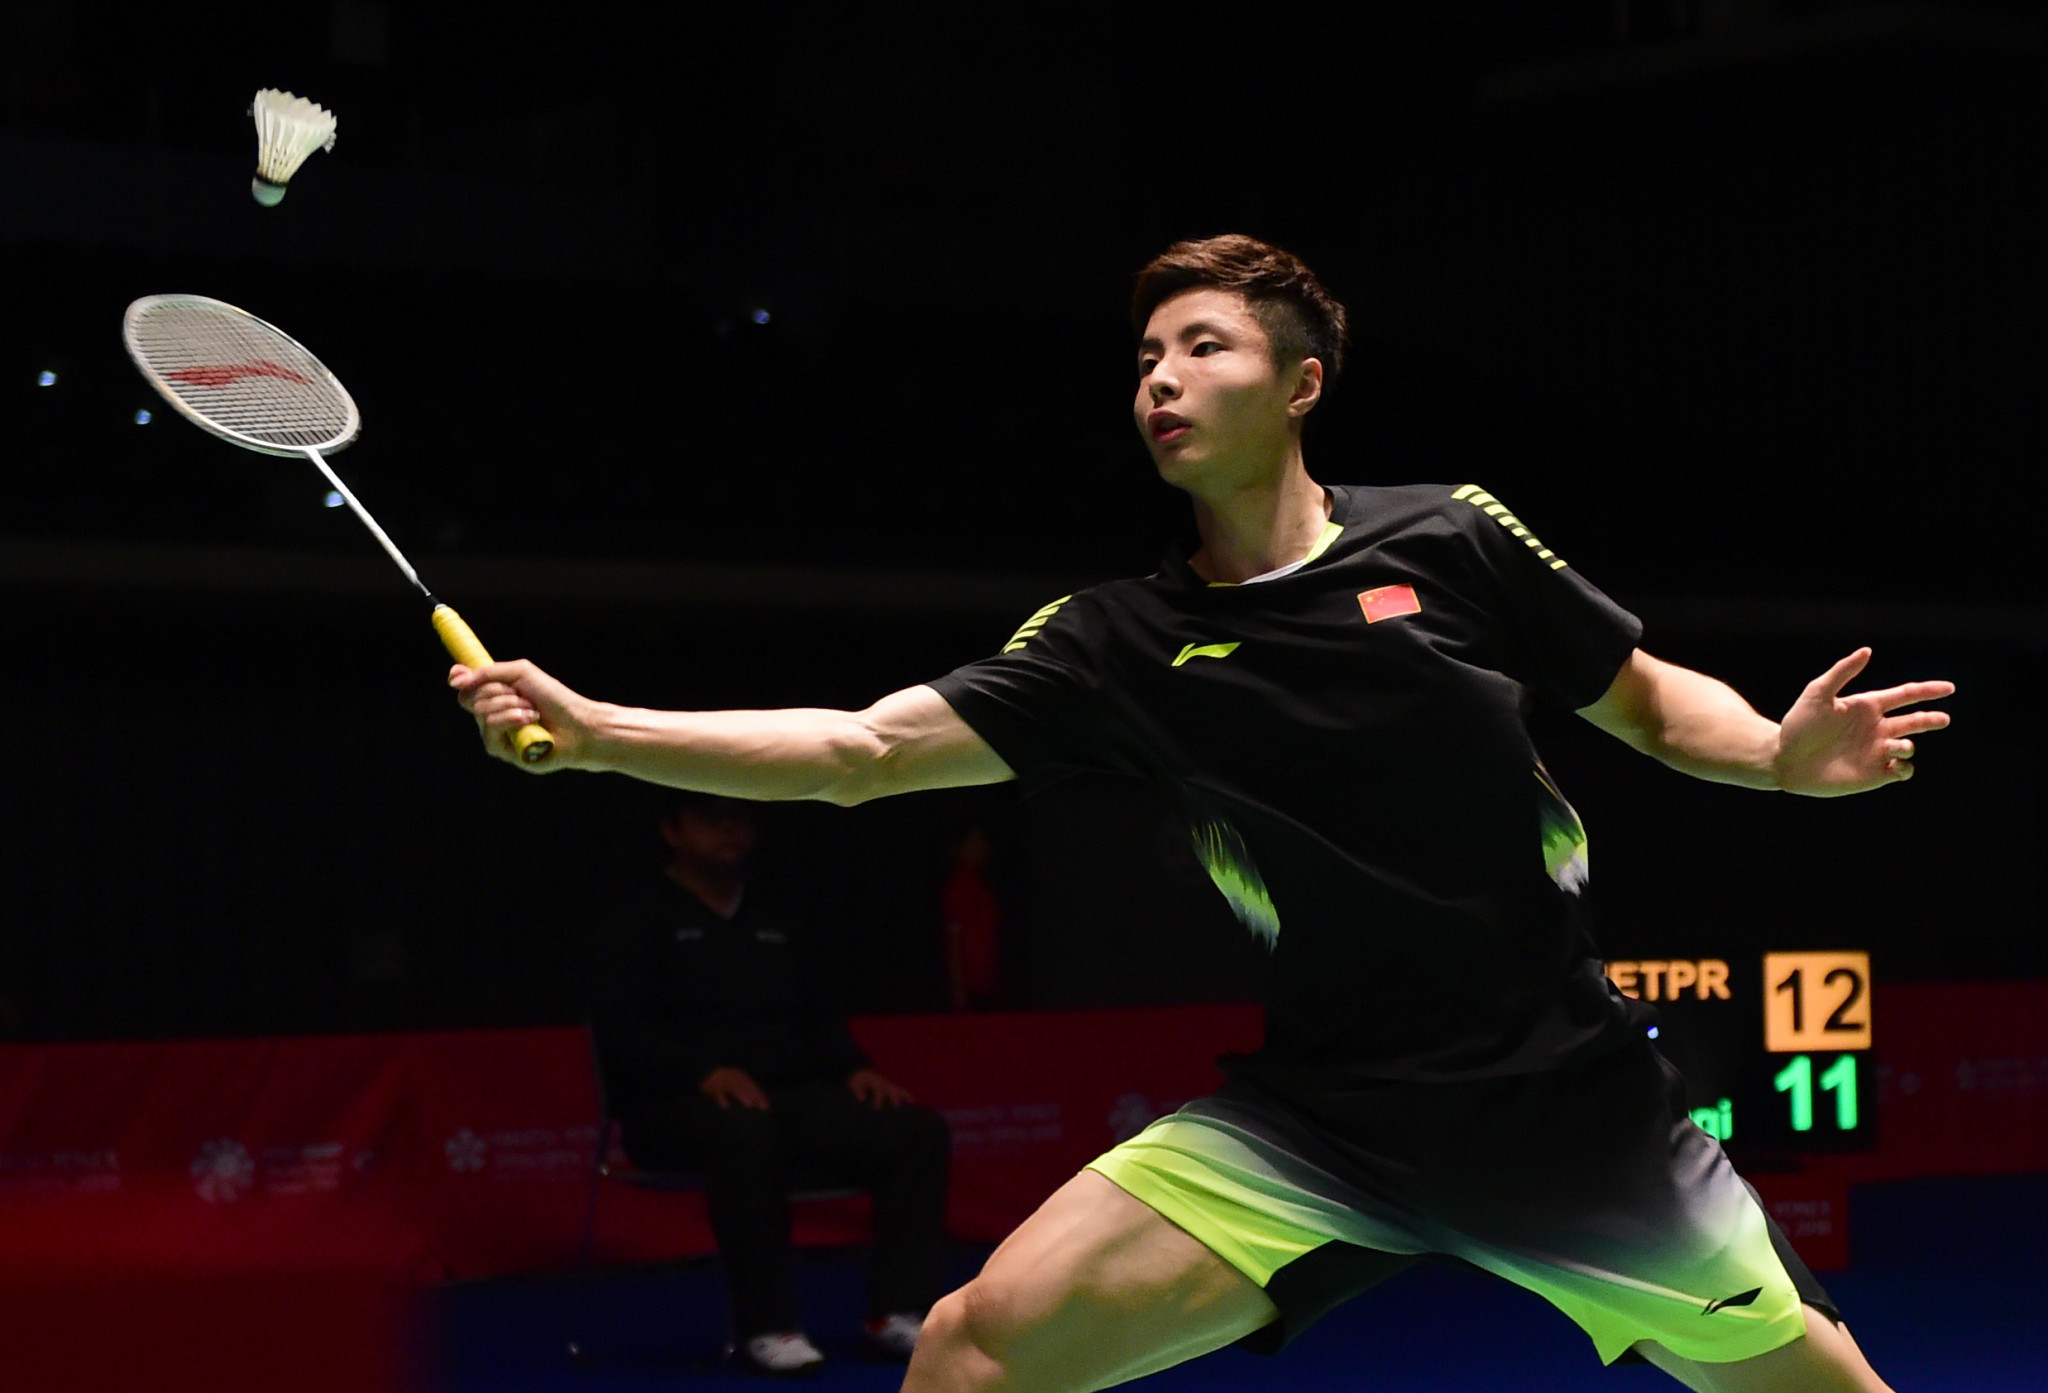 Home favourite Shi books place in BWF China Open semifinals